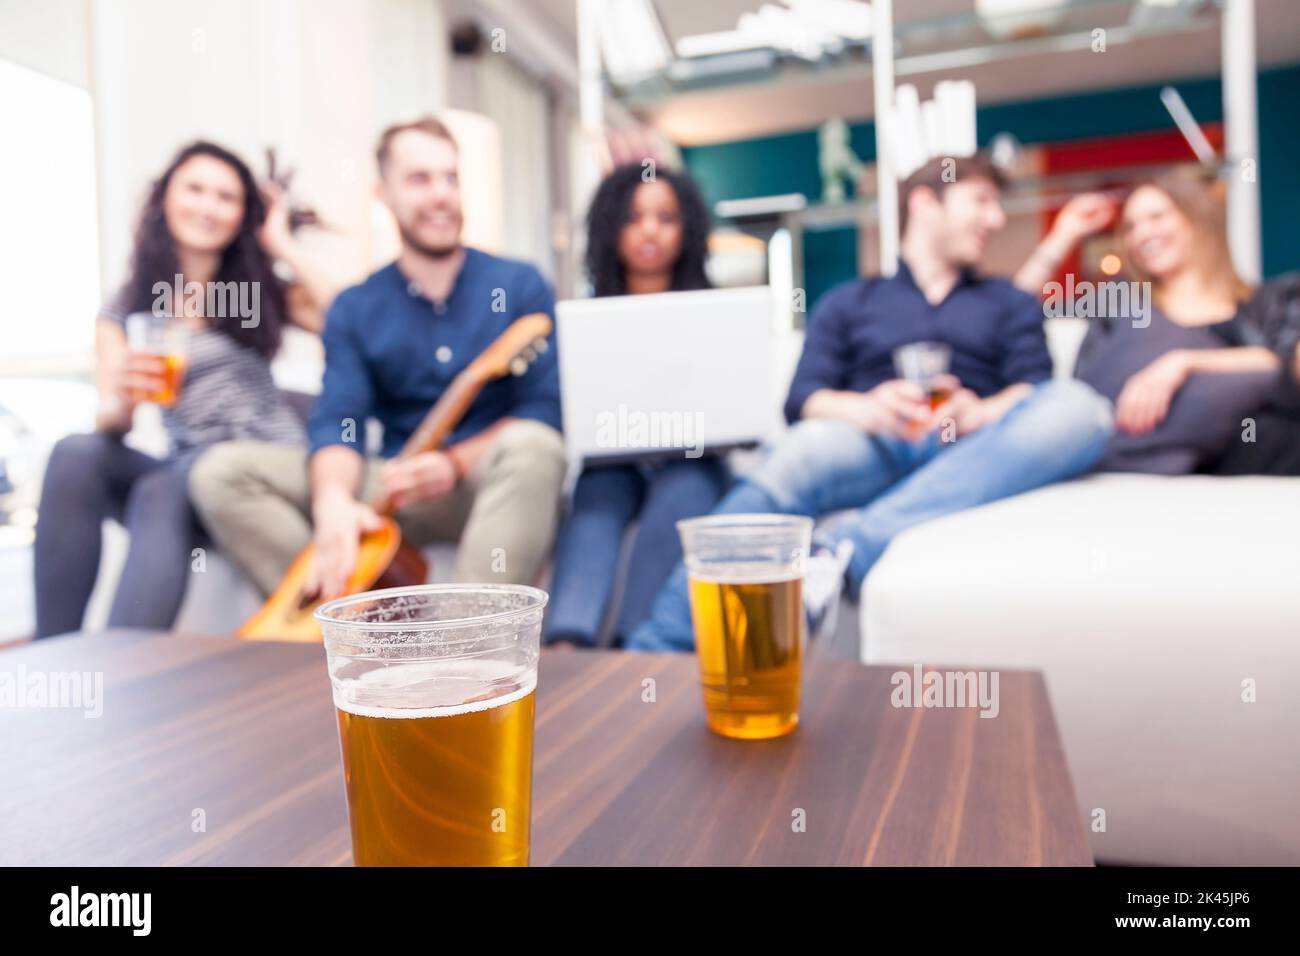 group of friends having fun drinking beer and playing guitar on couch. blurred image Stock Photo